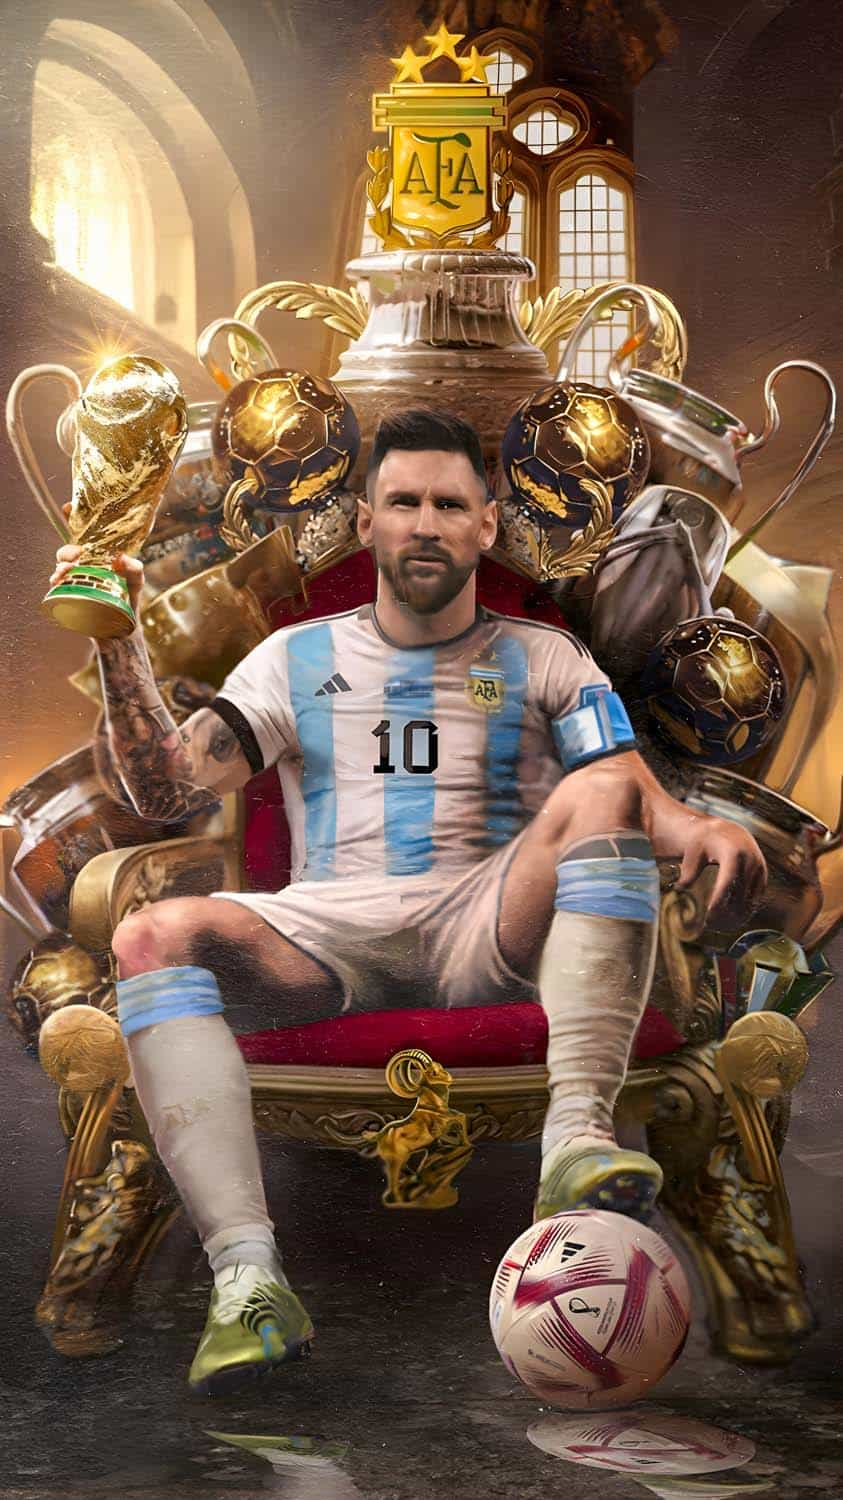 Background Messi Wallpaper Discover more Argentine, Captain, Football,  Lionel Andrés Messi, Messi wallpaper. https://www… | Lionel messi, Messi,  Lionel andrés messi